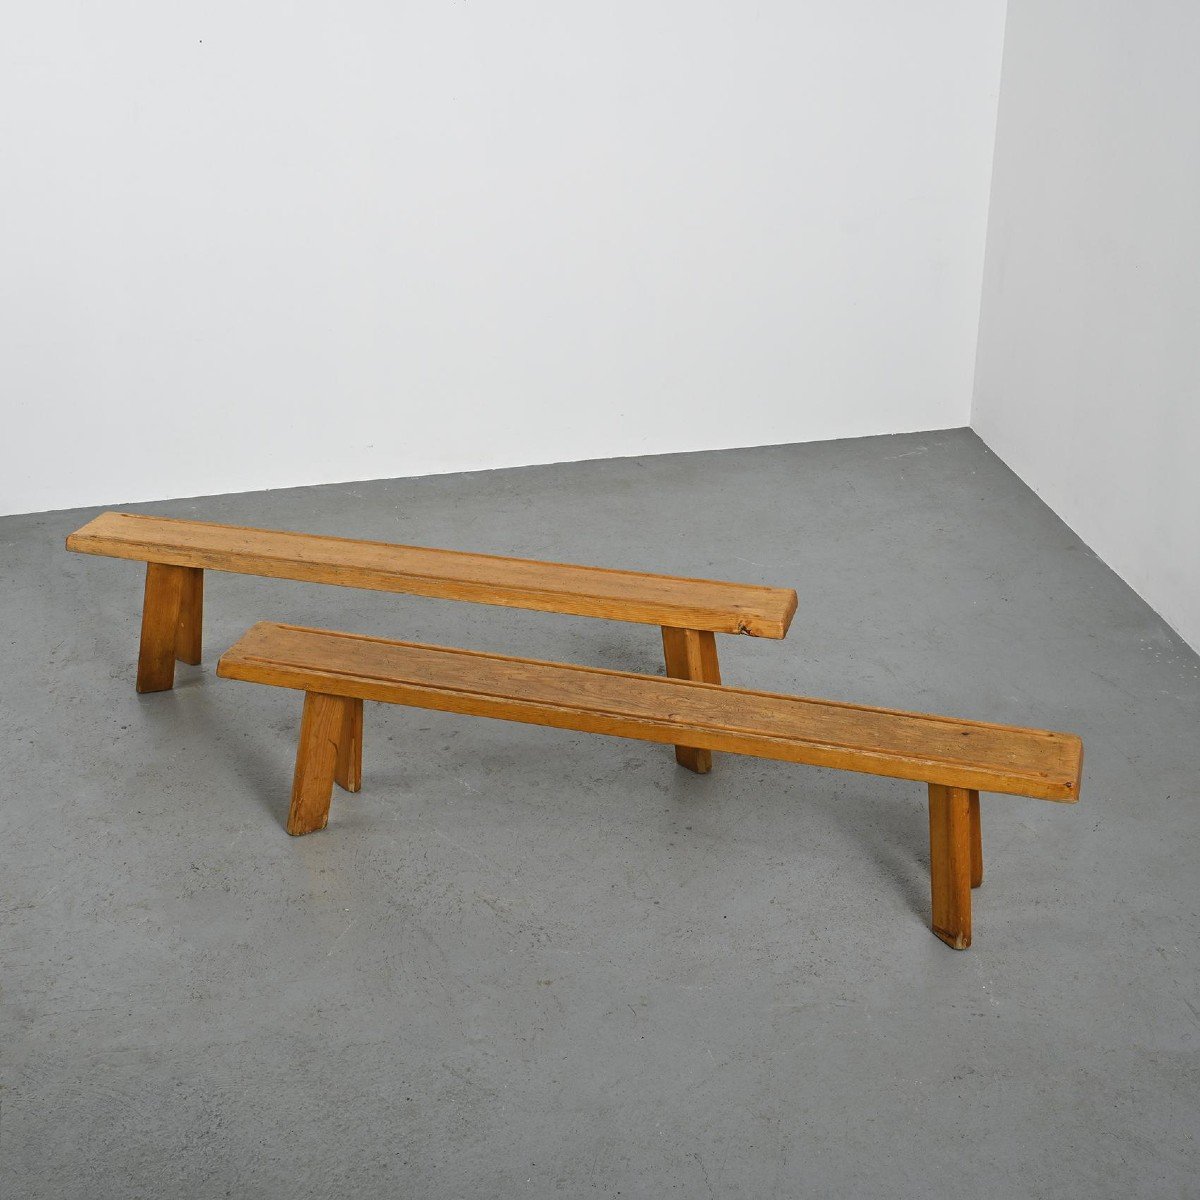 Larch Table And Benches By Christian Durupt, Circa 1960 -photo-5